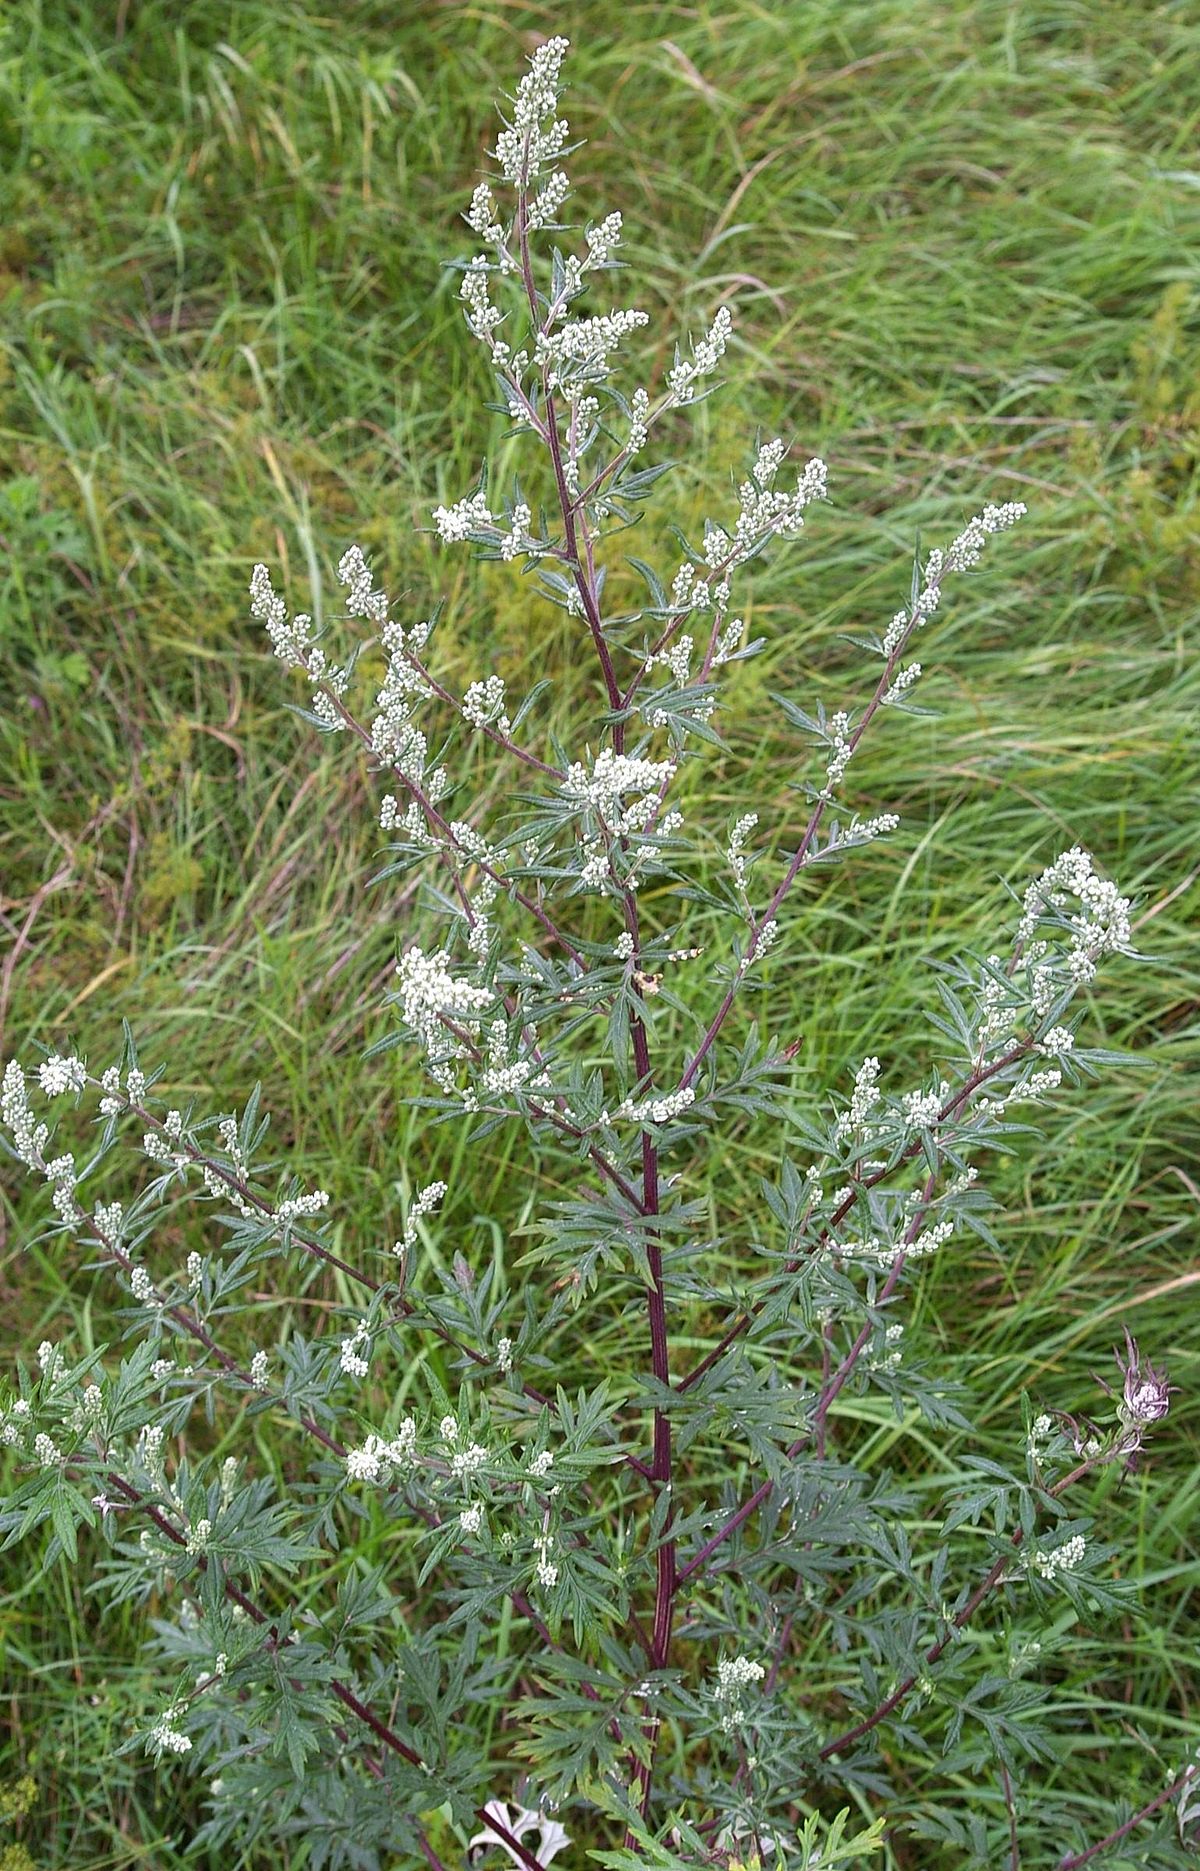 Extract of medicinal plant Artemisia annua interferes with